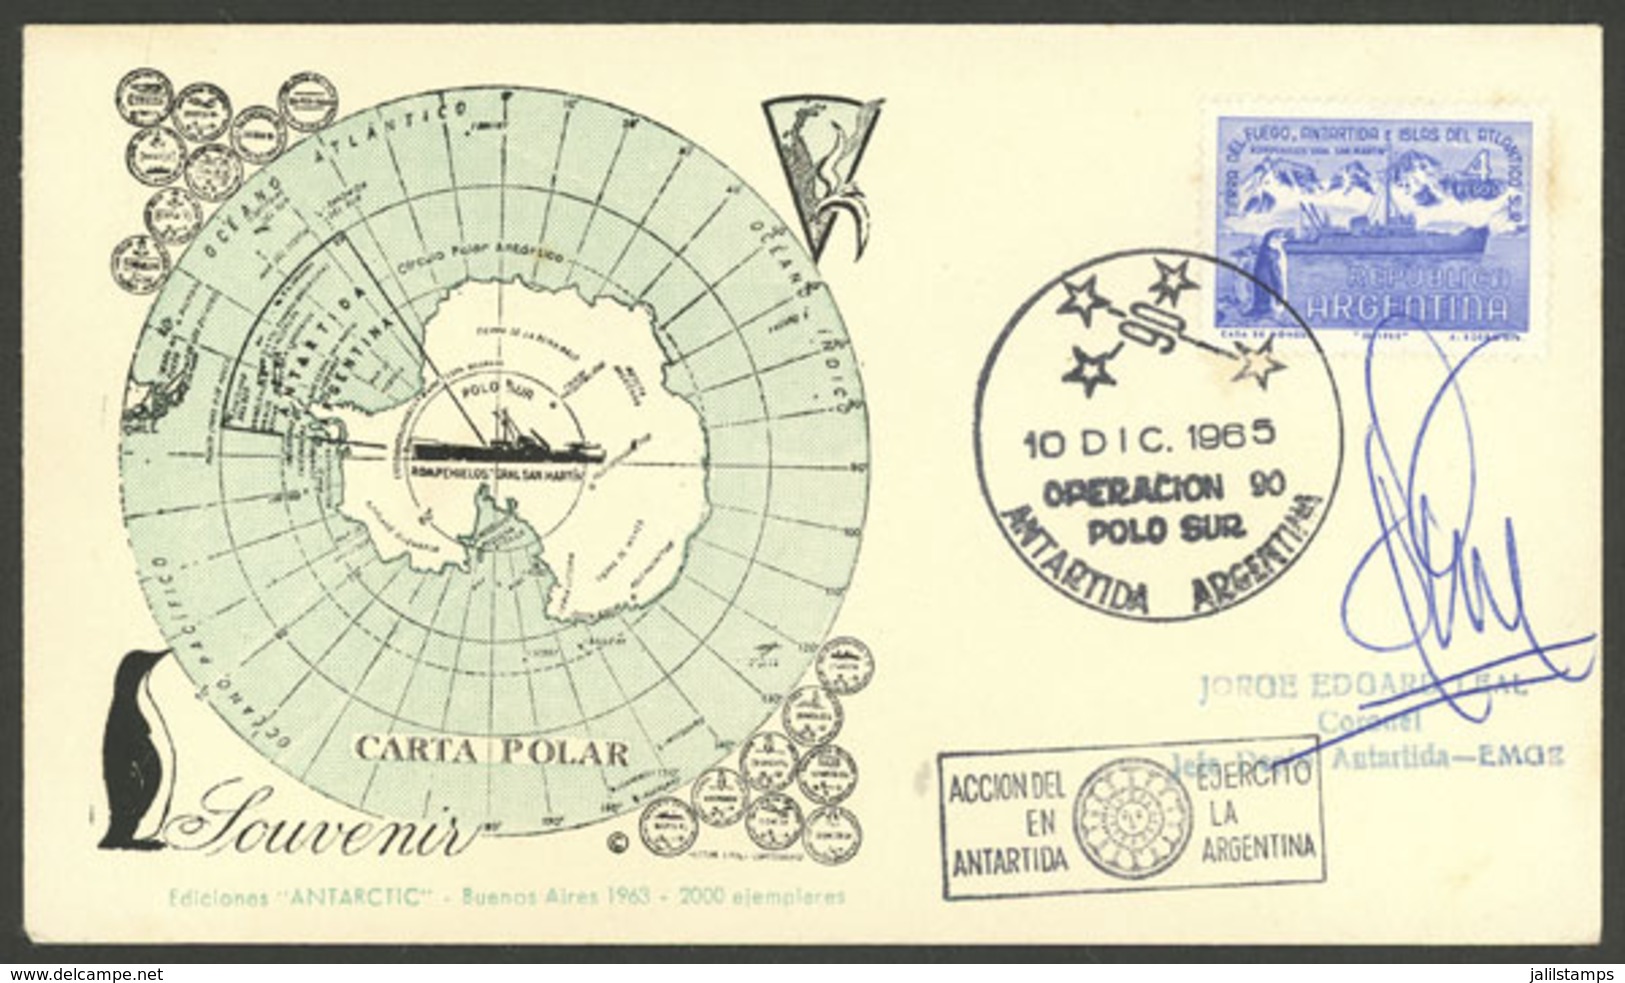 ARGENTINE ANTARCTICA: Cover Commemorating The "Operación 90" Expedition To The South Pole, Signed By Cnel. Jorge Leal, C - Lettres & Documents